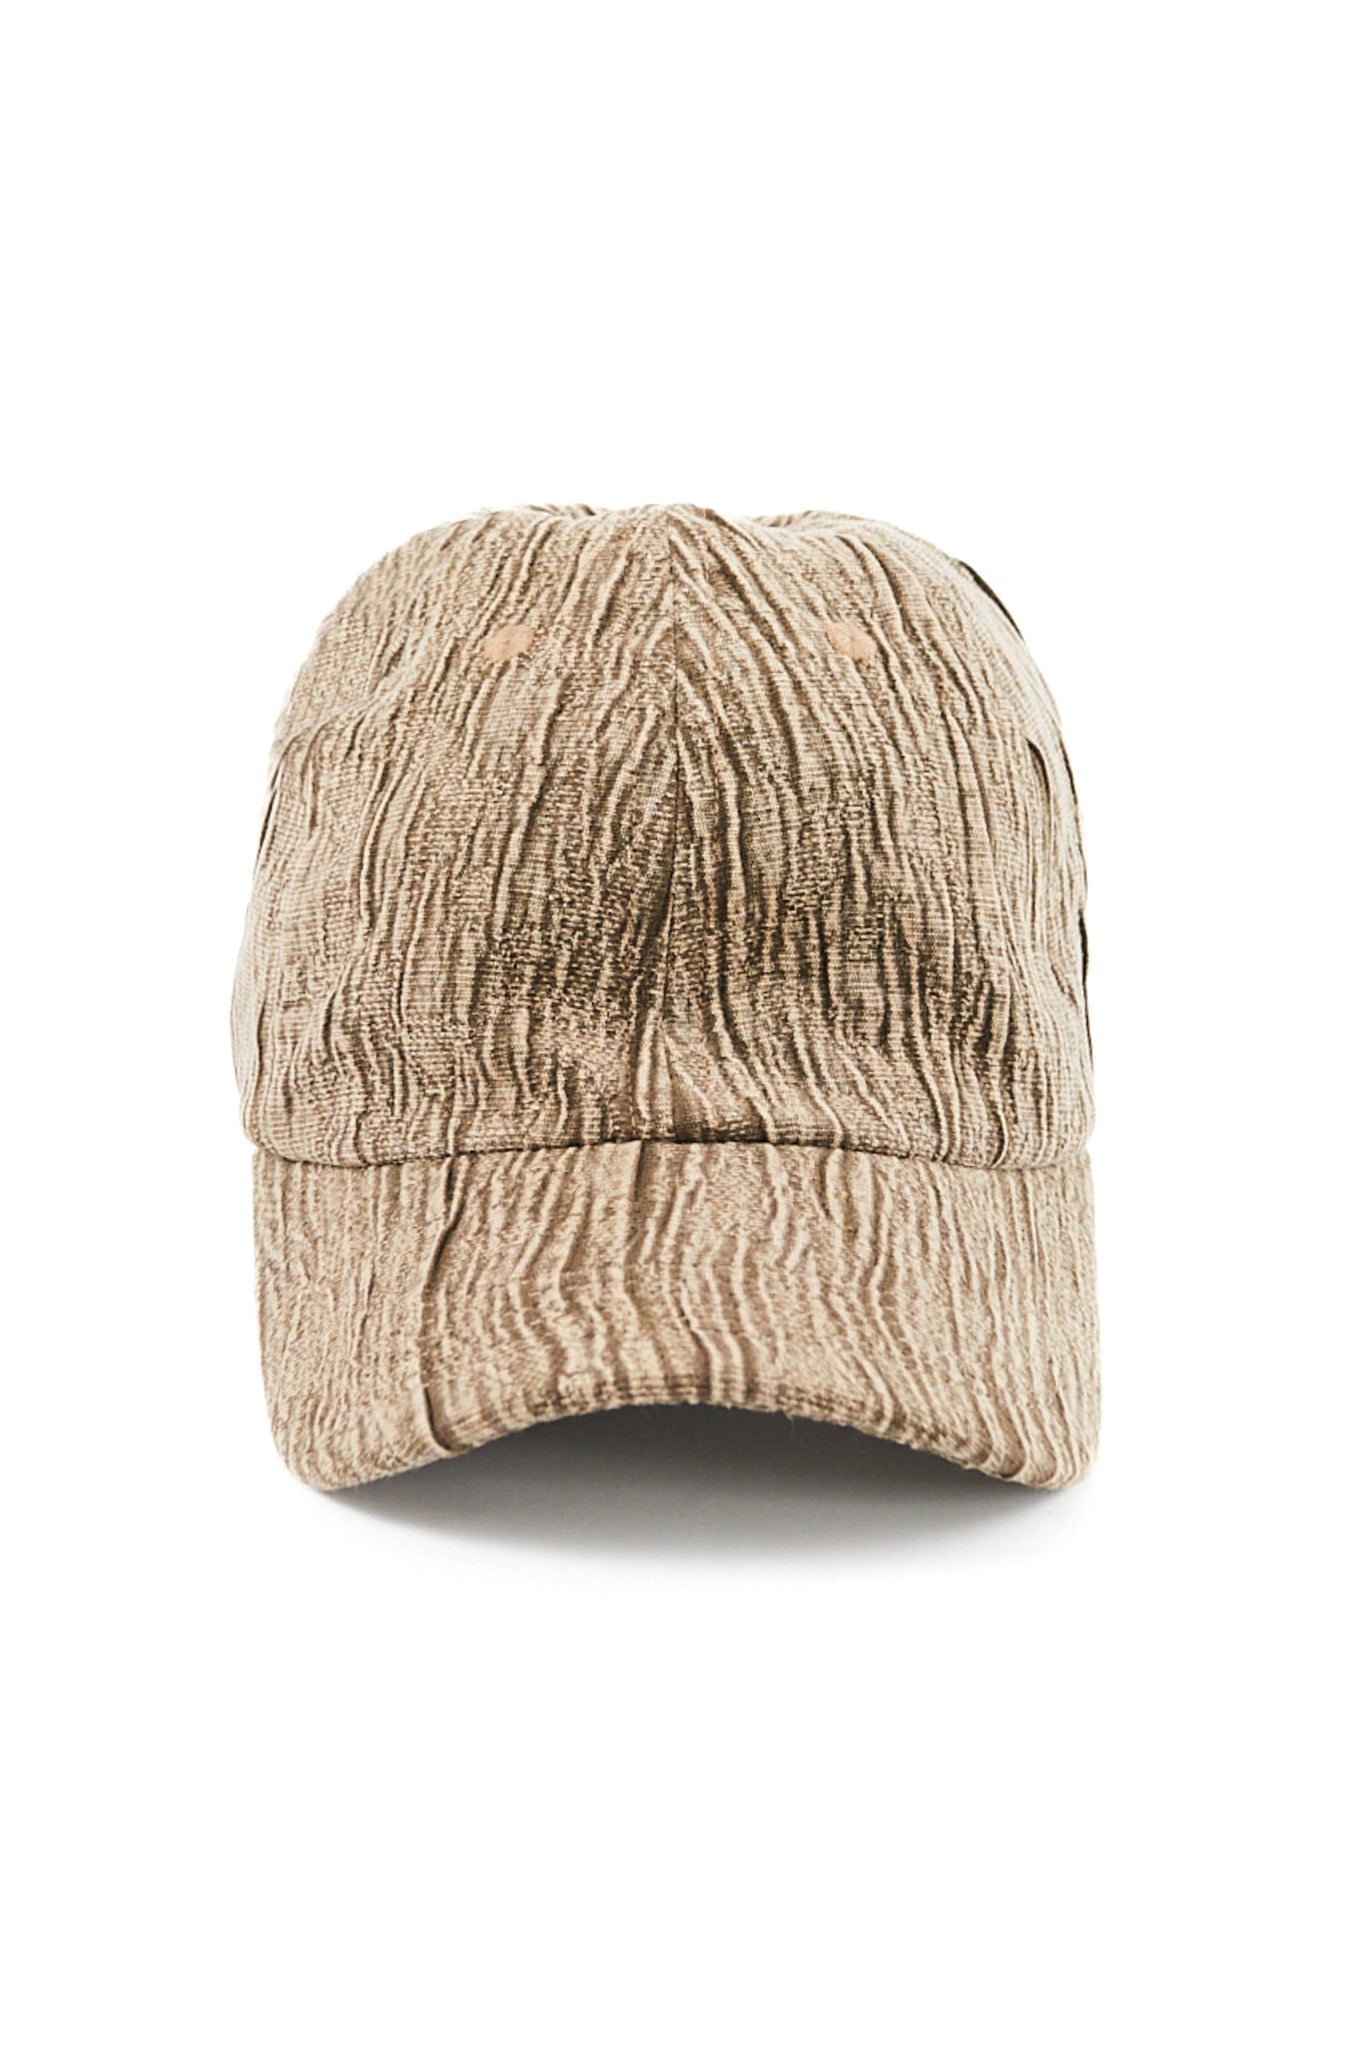 VALLEY SIX PANEL HAT - WASHED BROWN "BARK" CRINKLE DOUBLE WEAVE